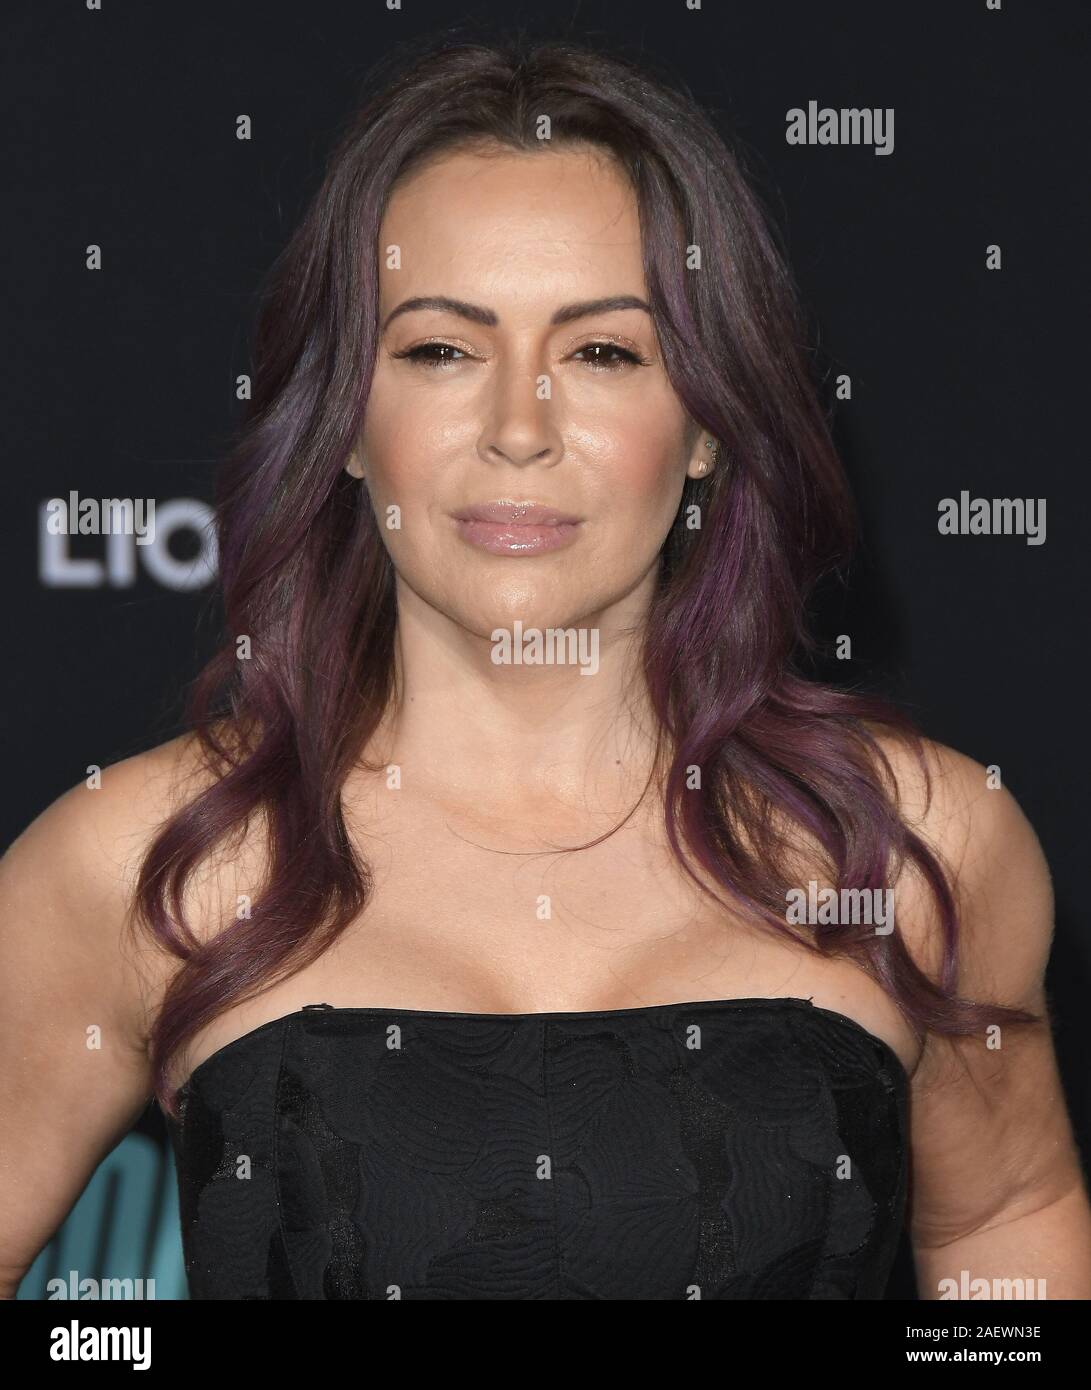 Alyssa Milano during the Los Angeles premiere of 'New Years Eve' in  California Stock Photo - Alamy